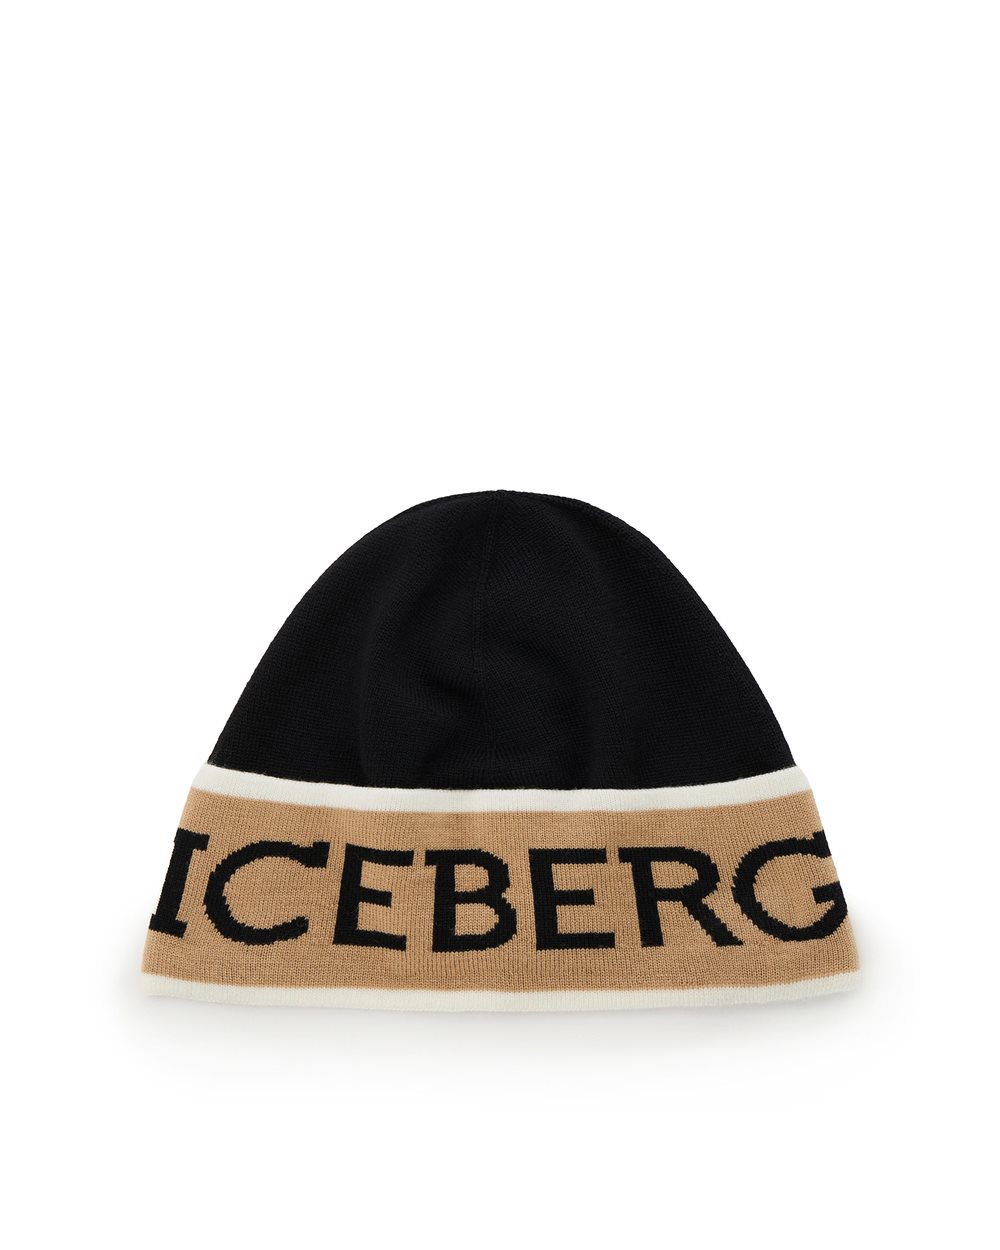 Black wool beanie with logo -  ( SECONDO STEP US )  PROMO UP TO 50%  | Iceberg - Official Website